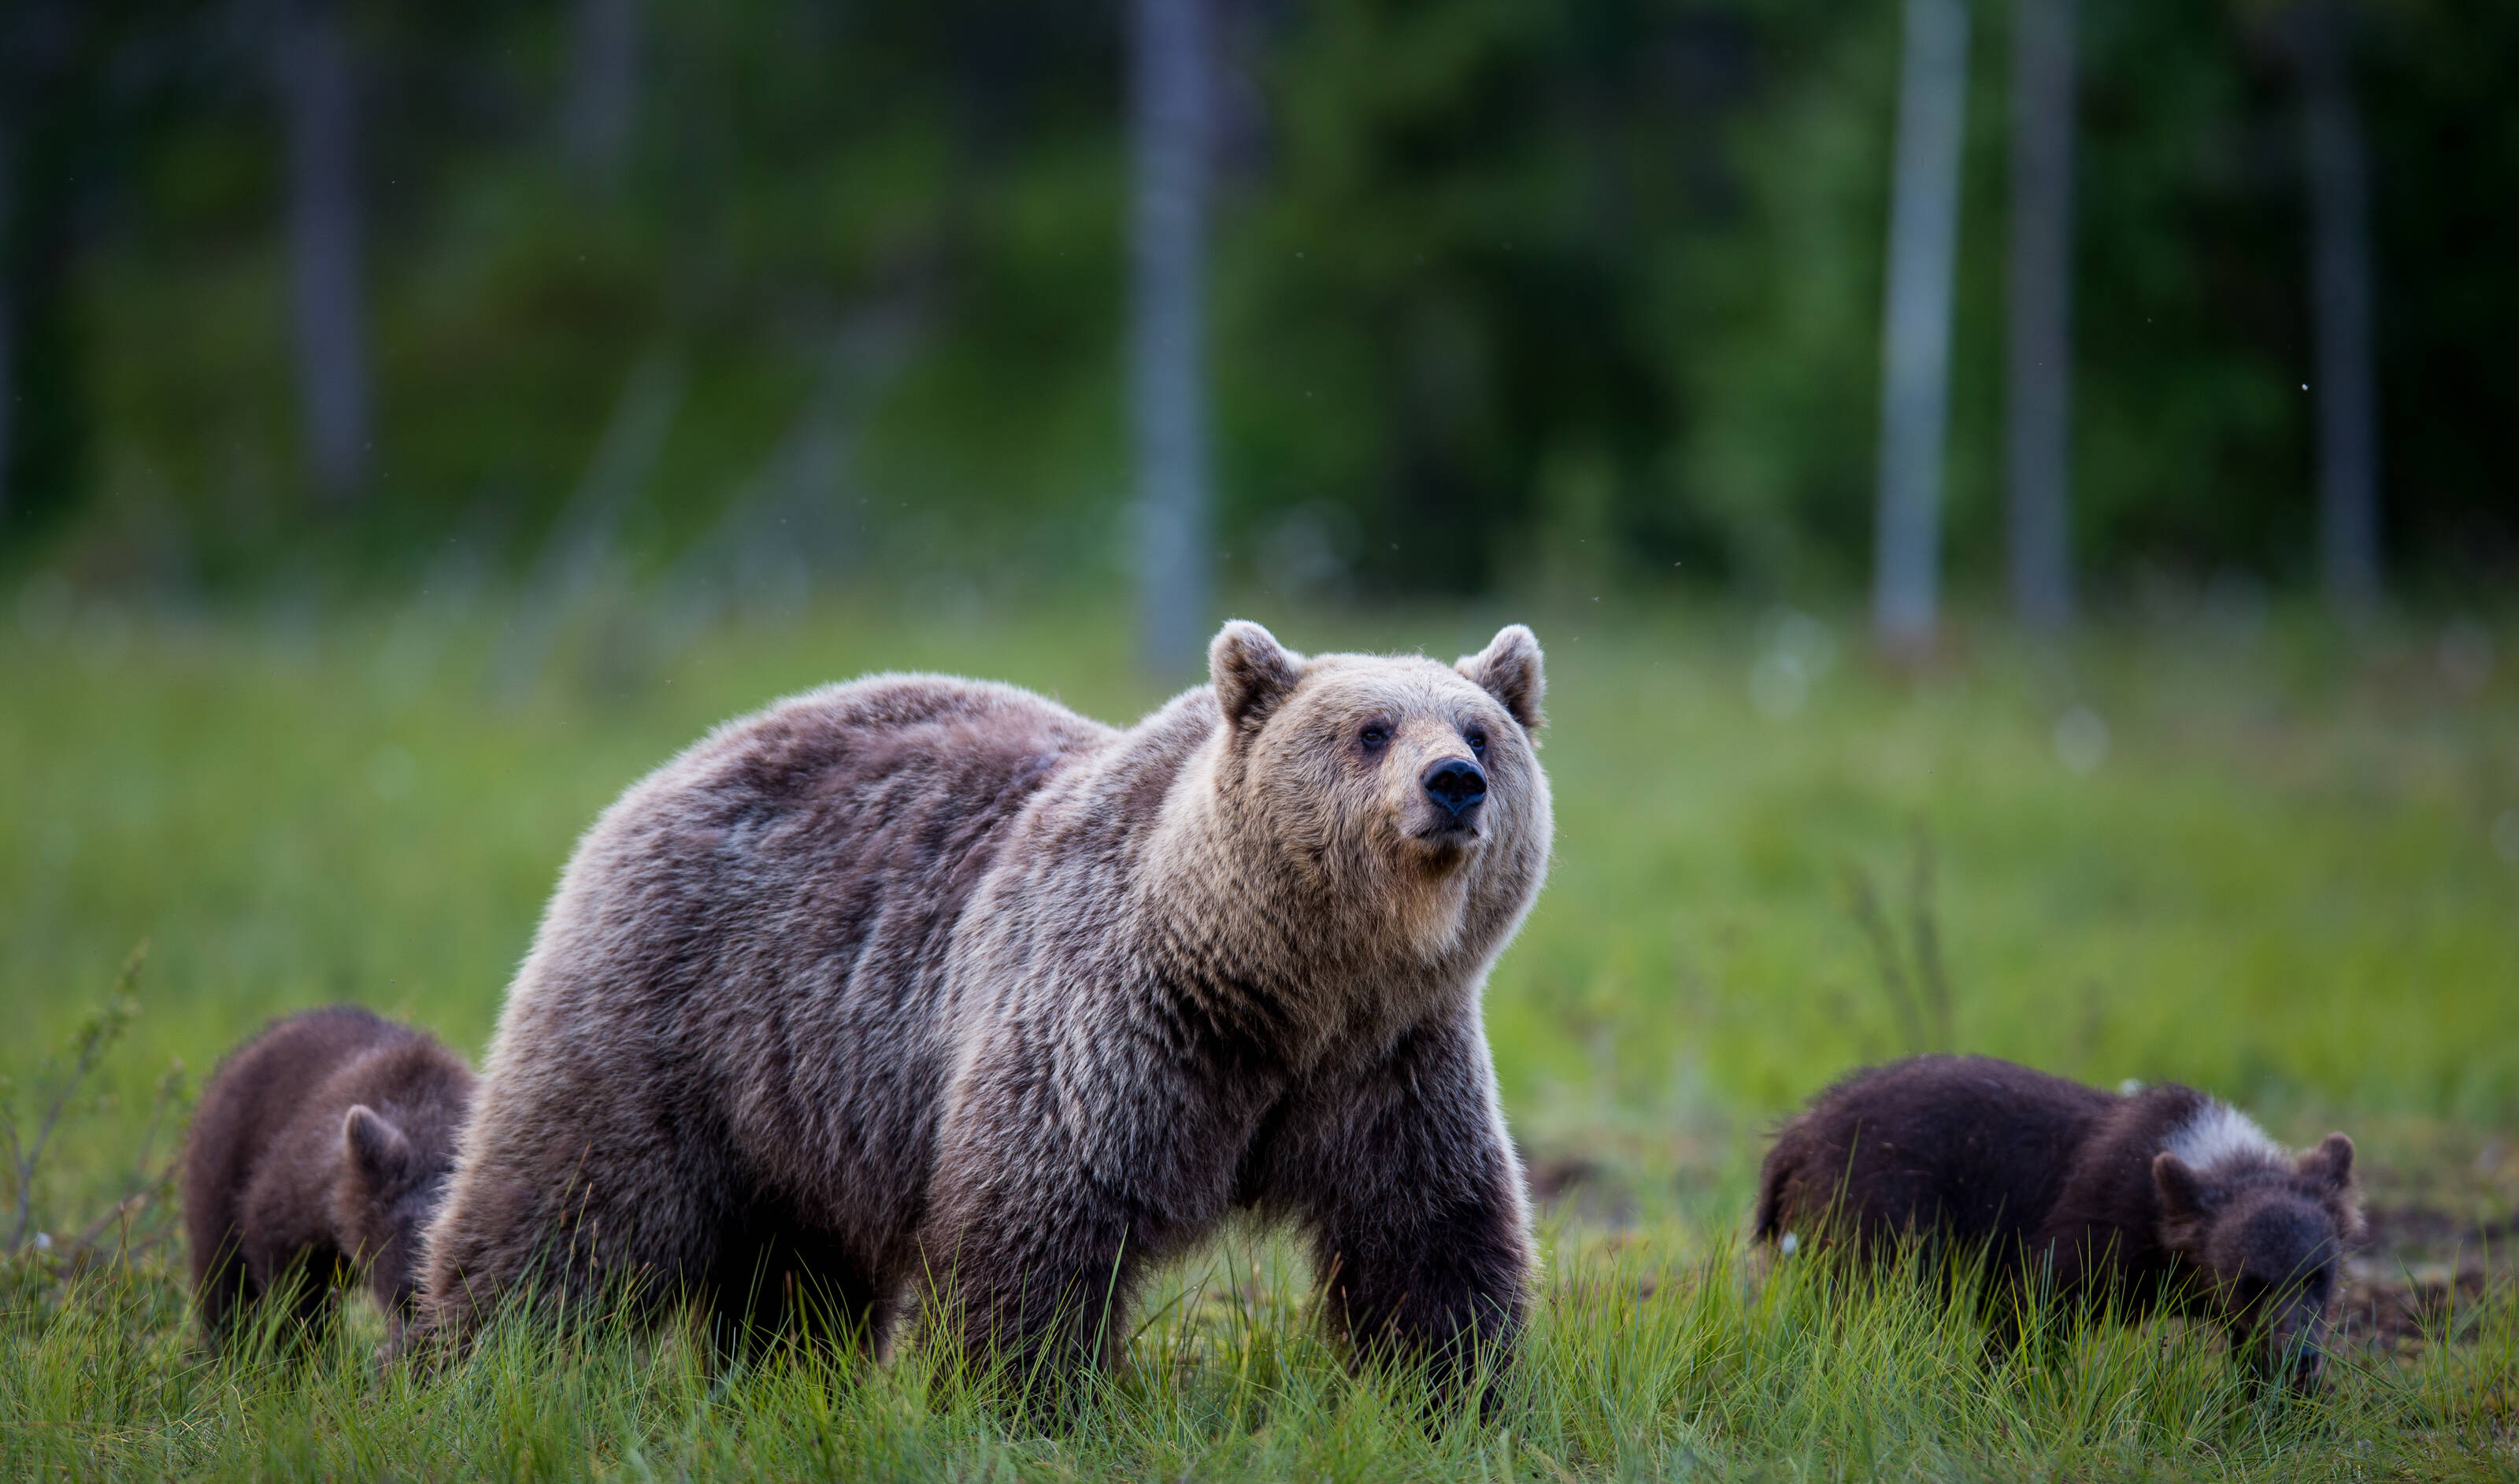 A mother bear and two cubs walk through a field in Finland.